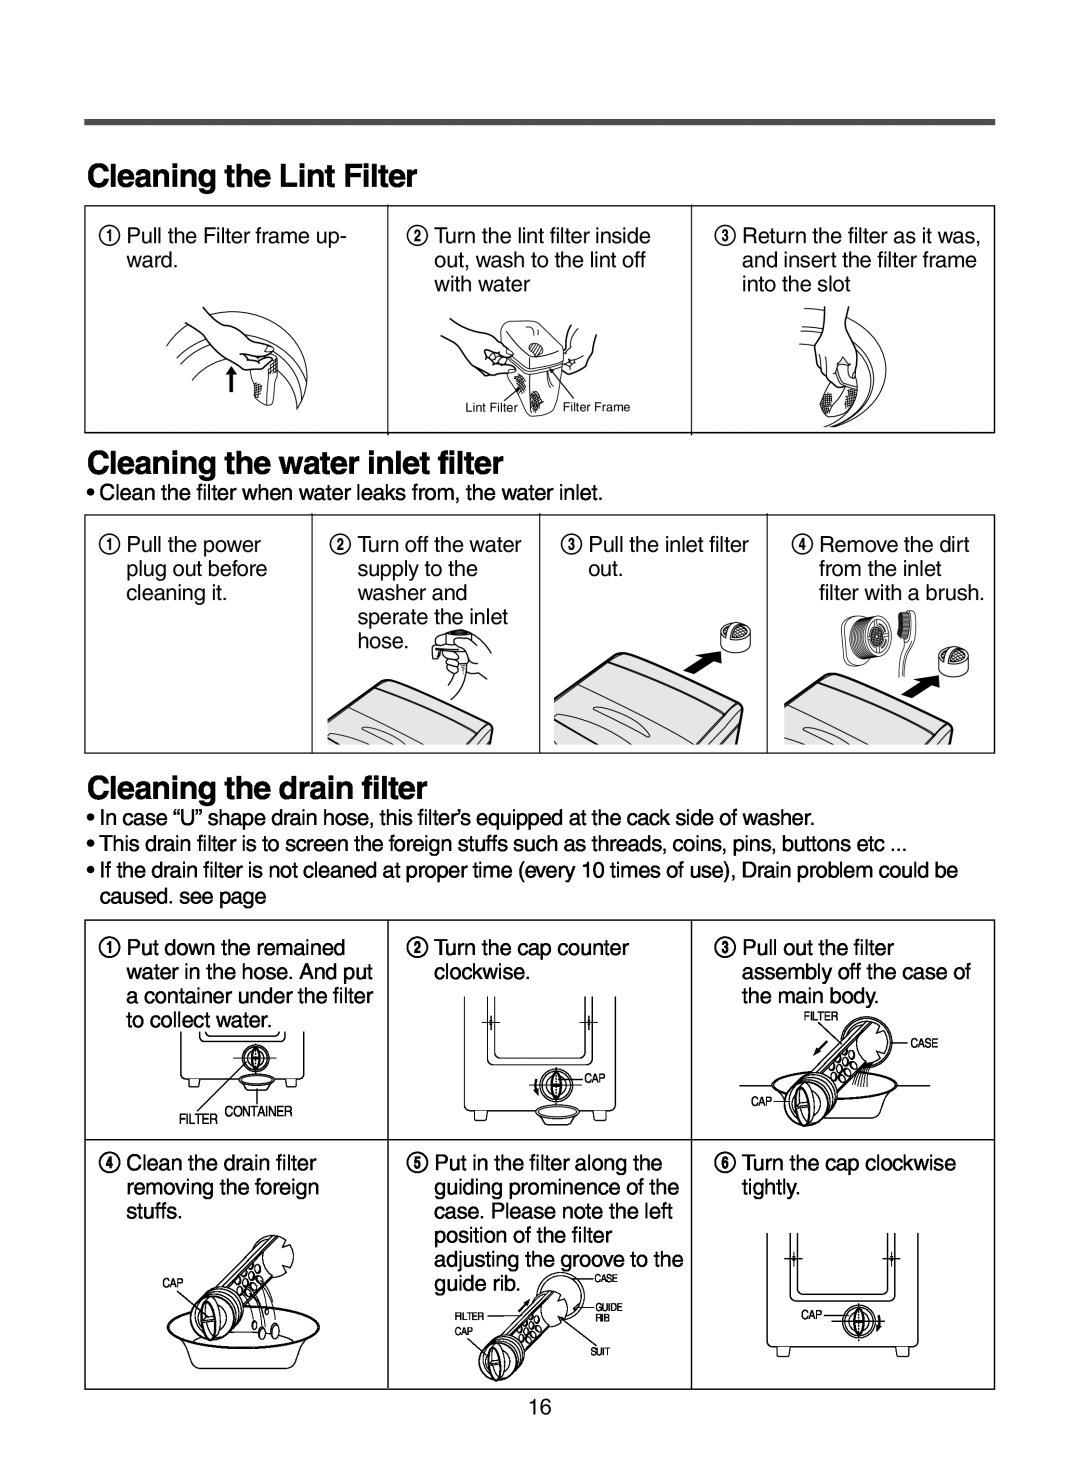 Daewoo DWF-6010 instruction manual Cleaning the Lint Filter, Cleaning the water inlet filter, Cleaning the drain filter 